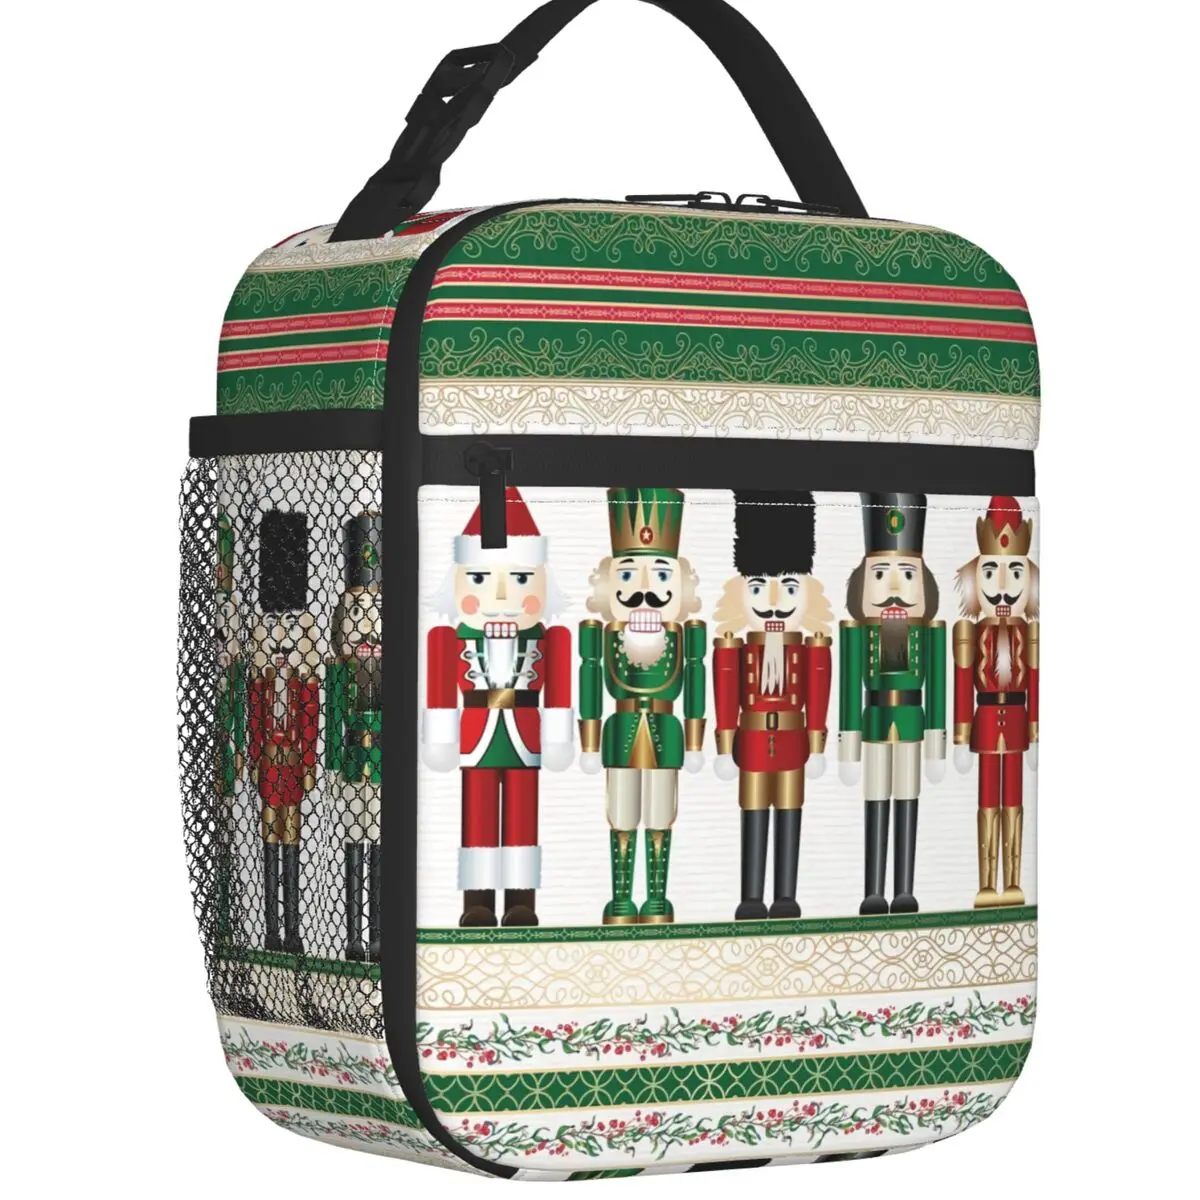 

Merry Christmas Nutcrackers Insulated Lunch Bags Nutcracker Soldier Doll Gift Portable Thermal Cooler Food Lunch Box Camp Travel